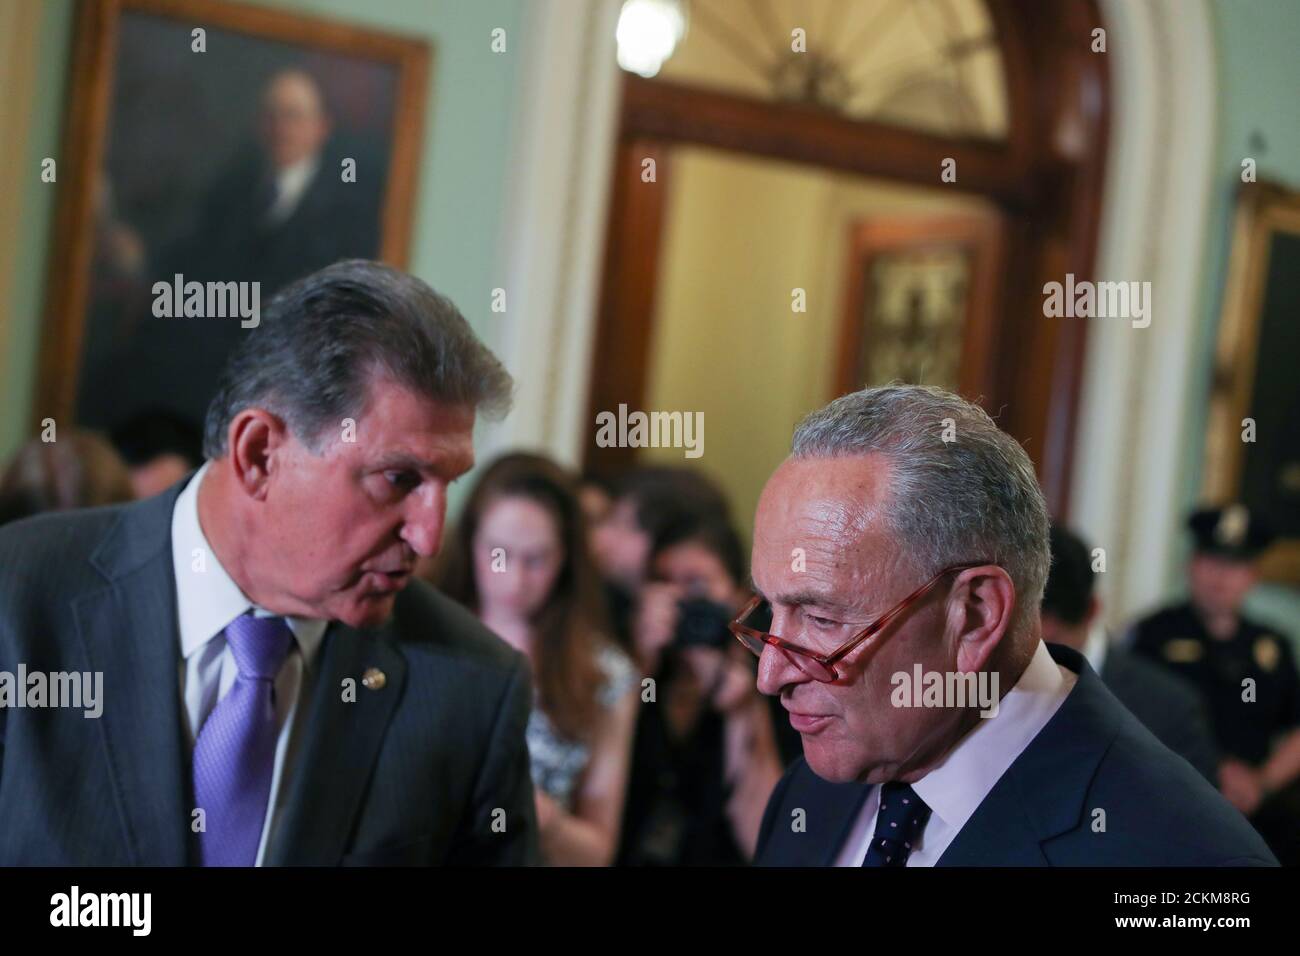 U.S. Senate Minority Leader Chuck Schumer (D-NY) and Senator Joe Manchin (D-WV) confer before addressing reporters following the weekly senate party caucus luncheons at the U.S. Capitol in Washington, U.S. July 9, 2019. REUTERS/Jonathan Ernst Stock Photo